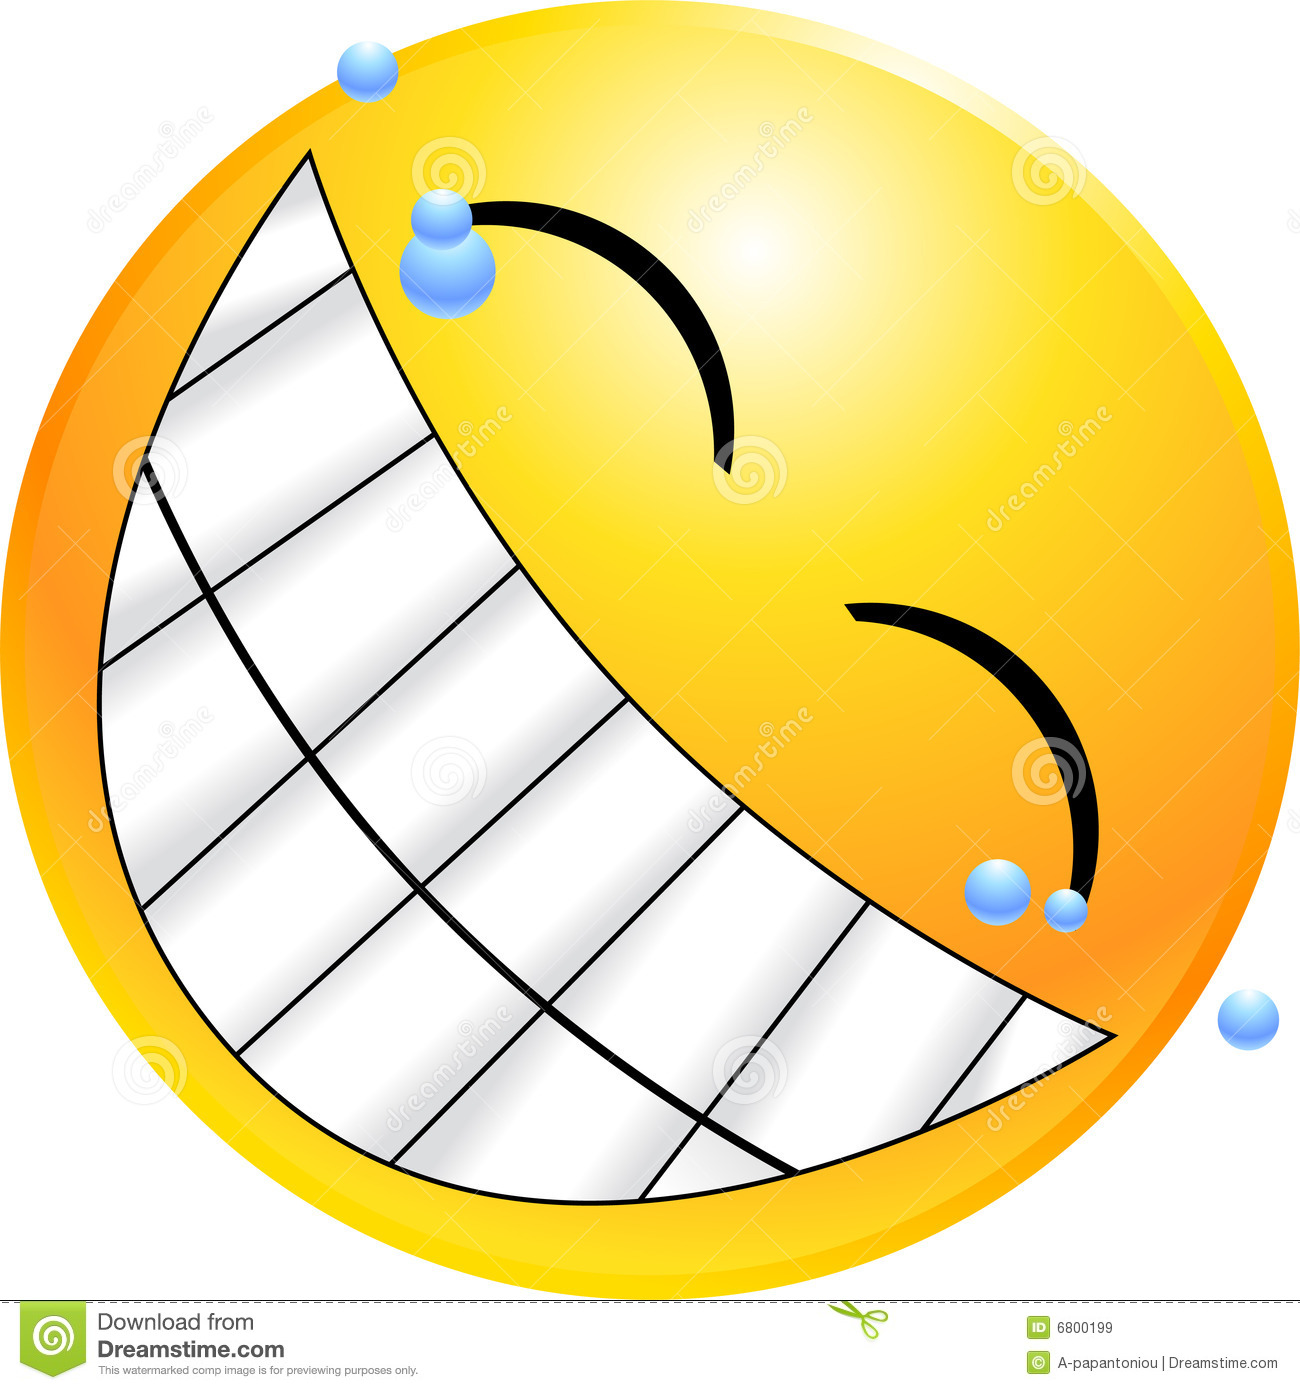 Smiley Face Animated Clip Art - Smiley Face Clip Art Free Download